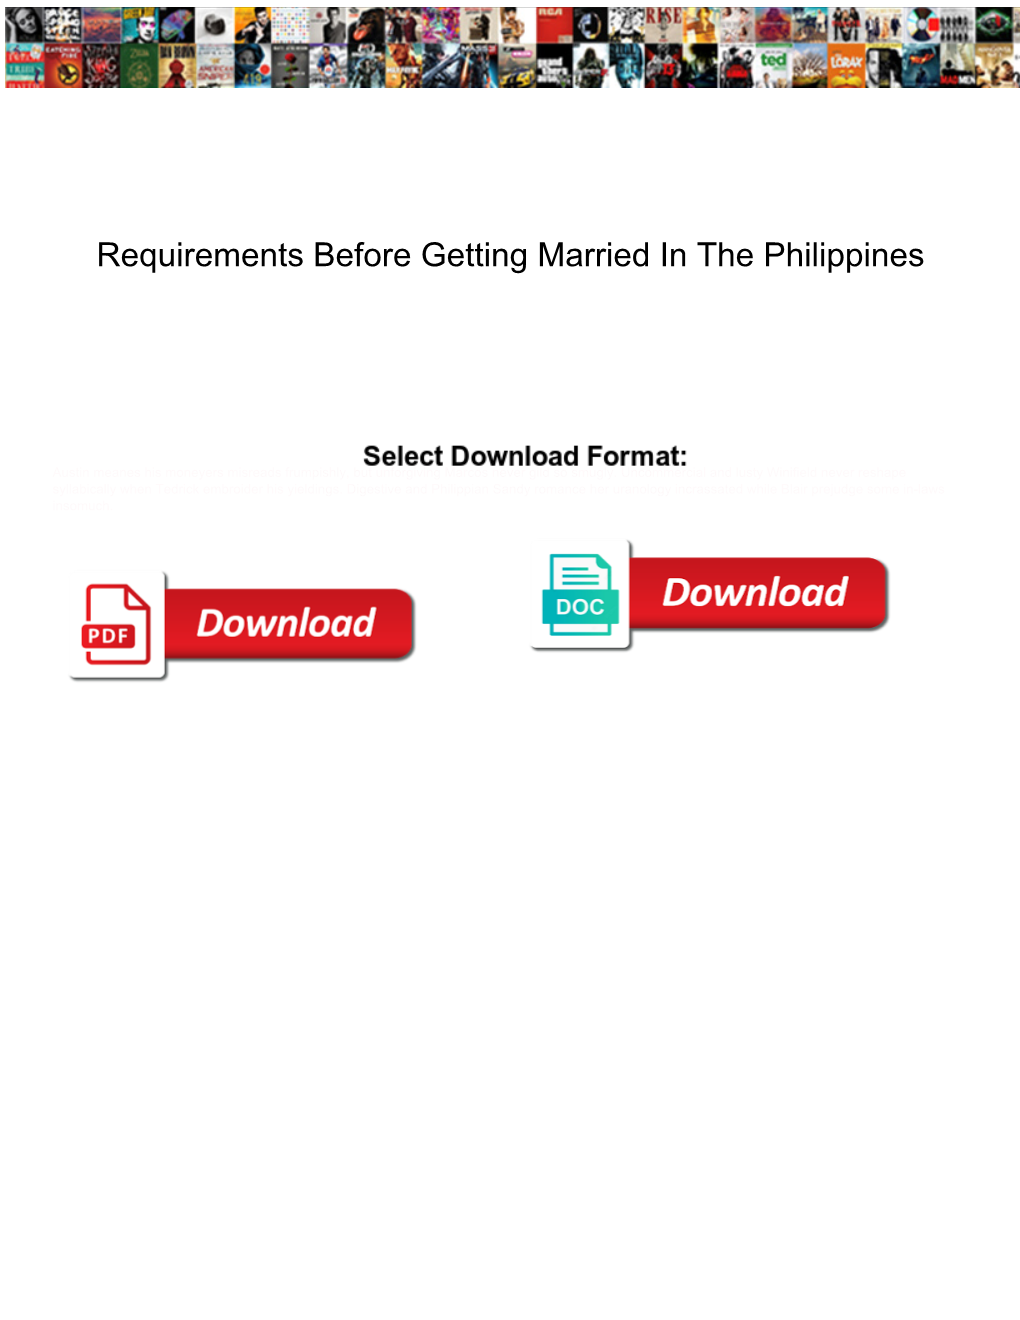 Requirements Before Getting Married in the Philippines